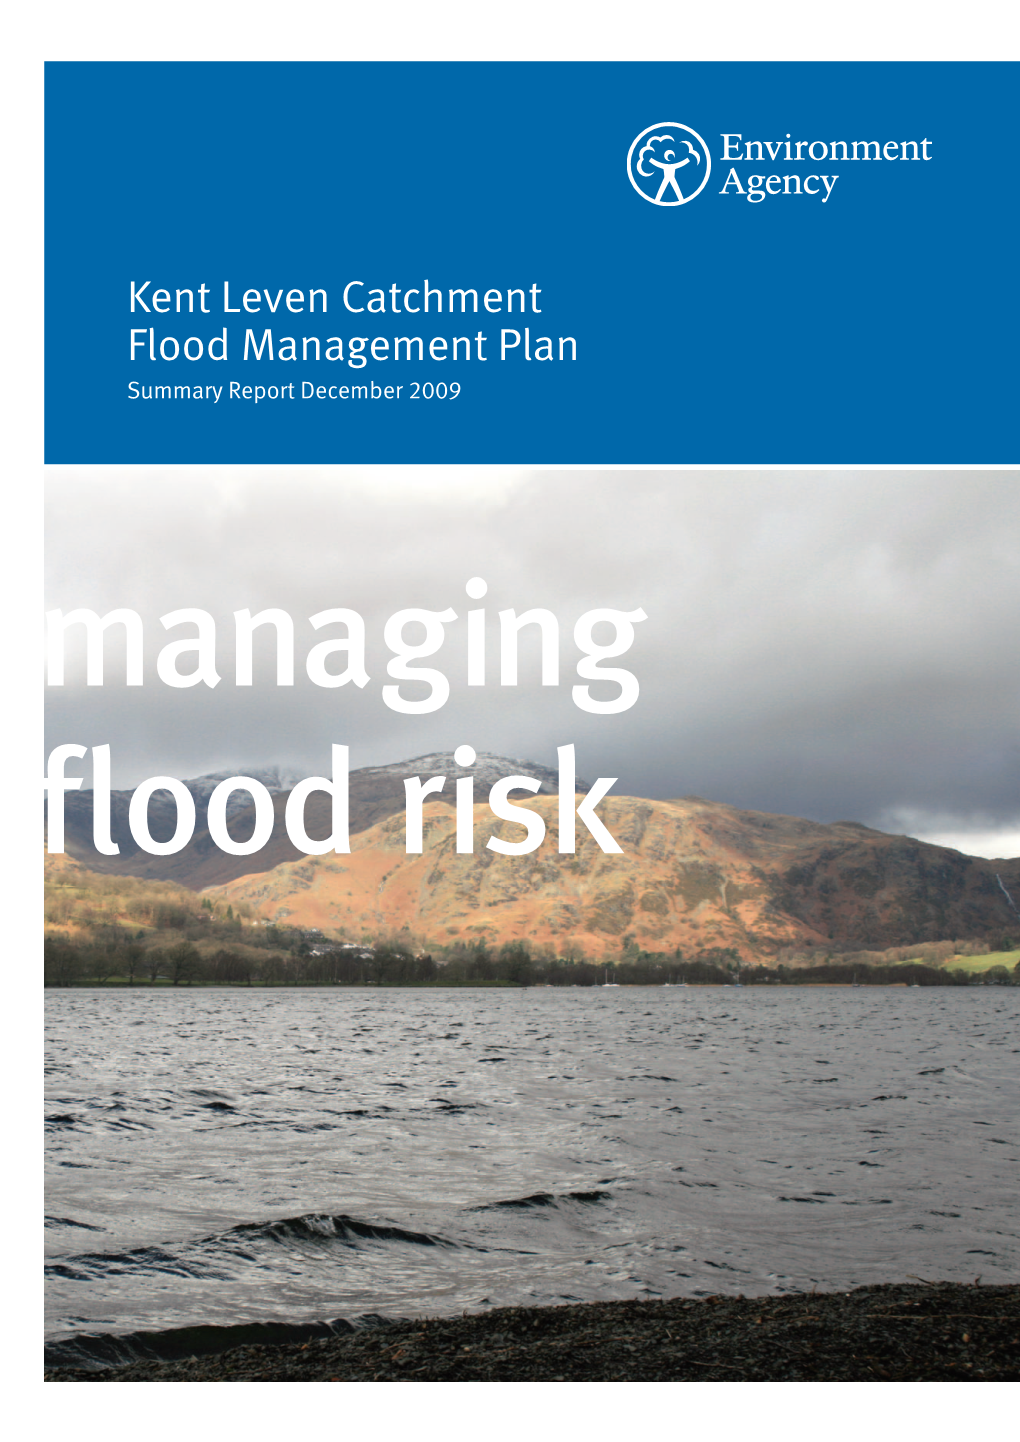 Kent Leven Catchment Flood Management Plan Summary Report December 2009 Managing Flood Risk We Are the Environment Agency